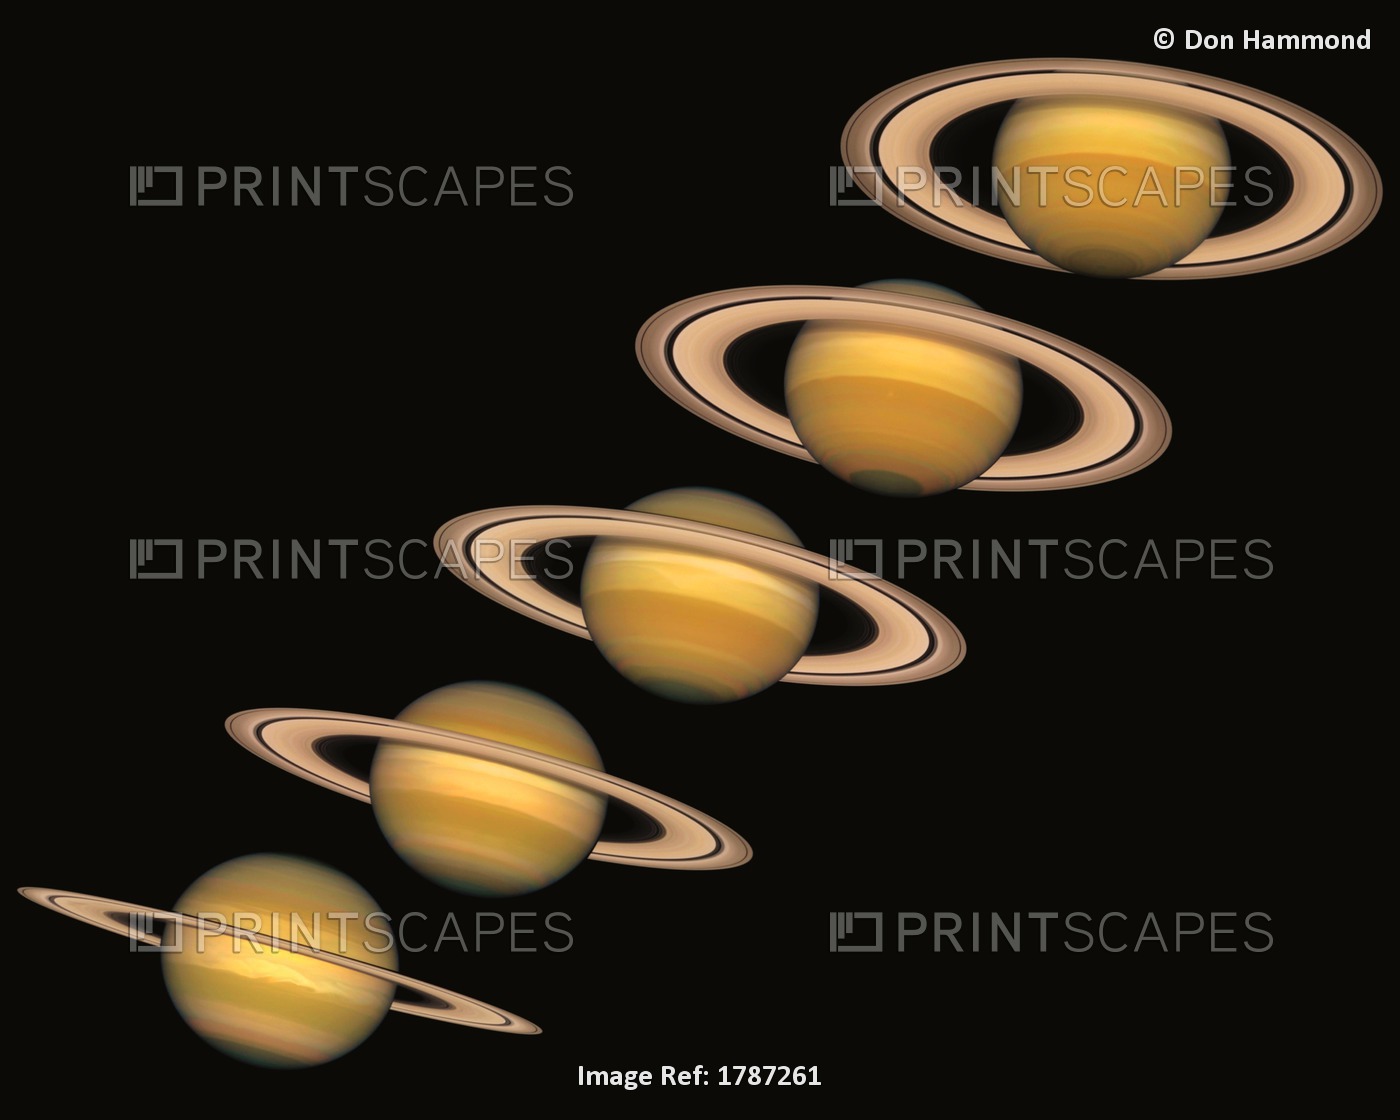 Views Of Saturn Over The Years (1996-2000)